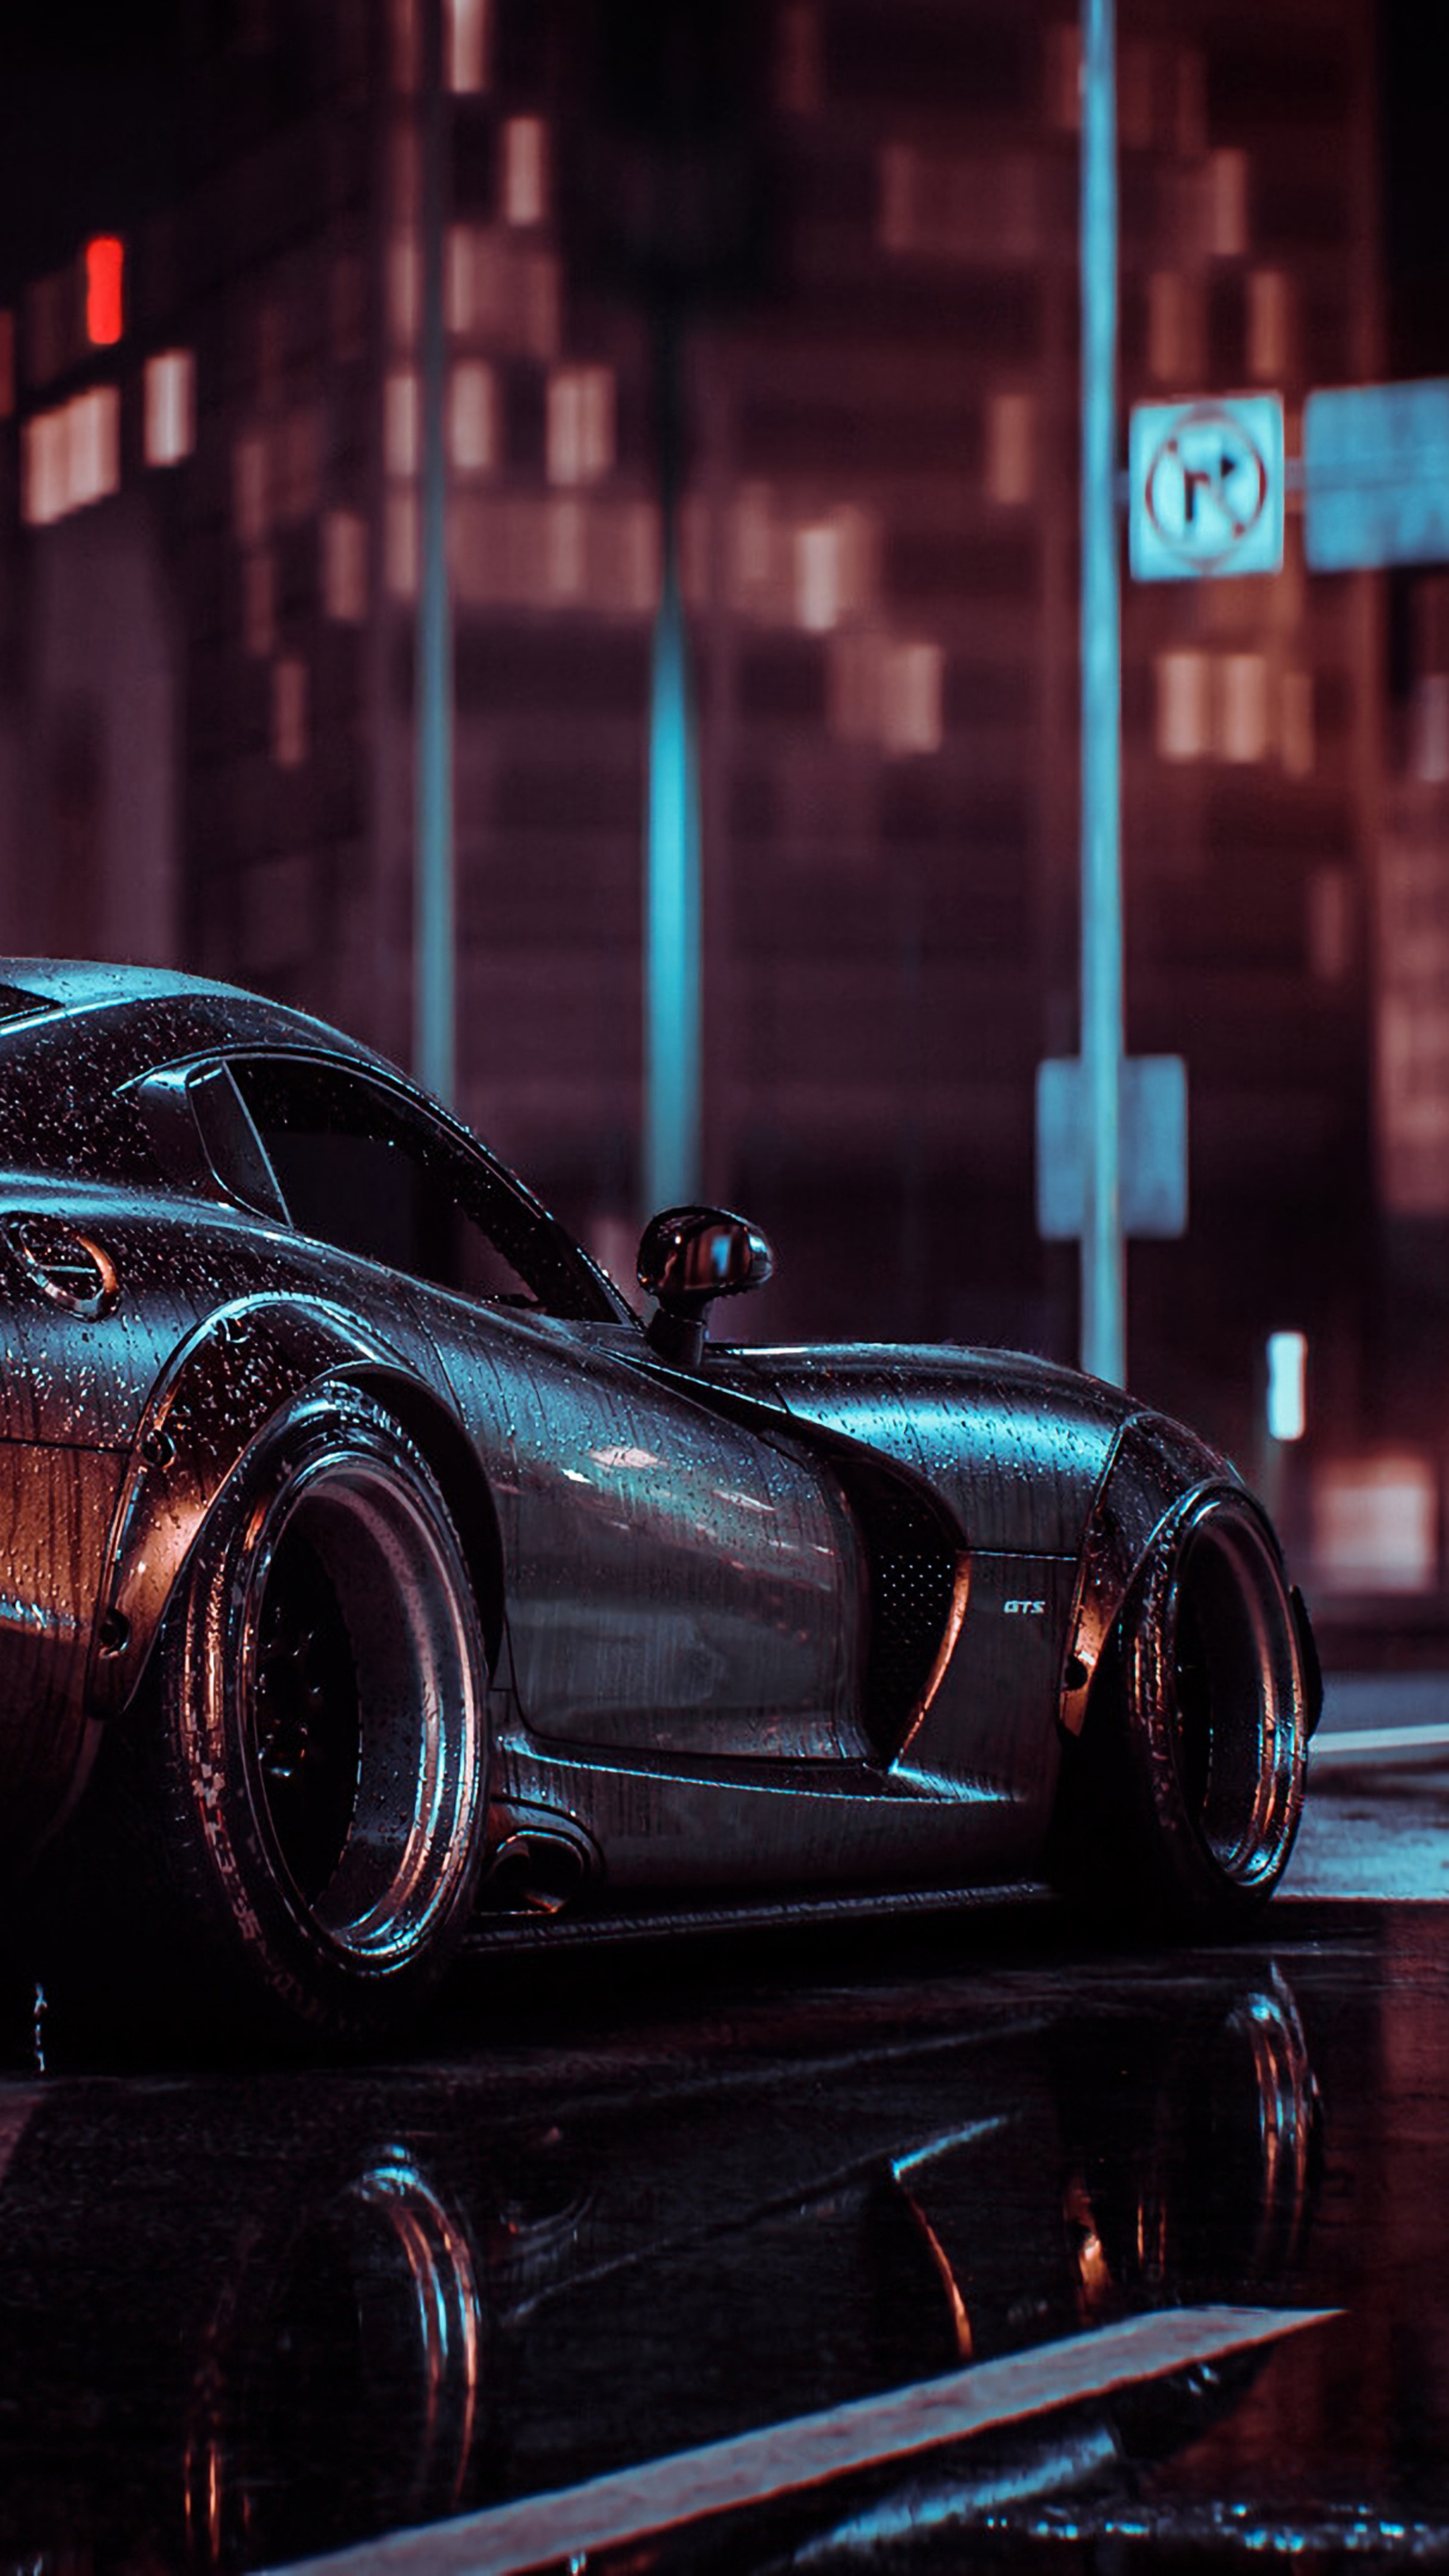 Dodge Viper, SRT, Need for Speed game, 2160x3840 4K Phone